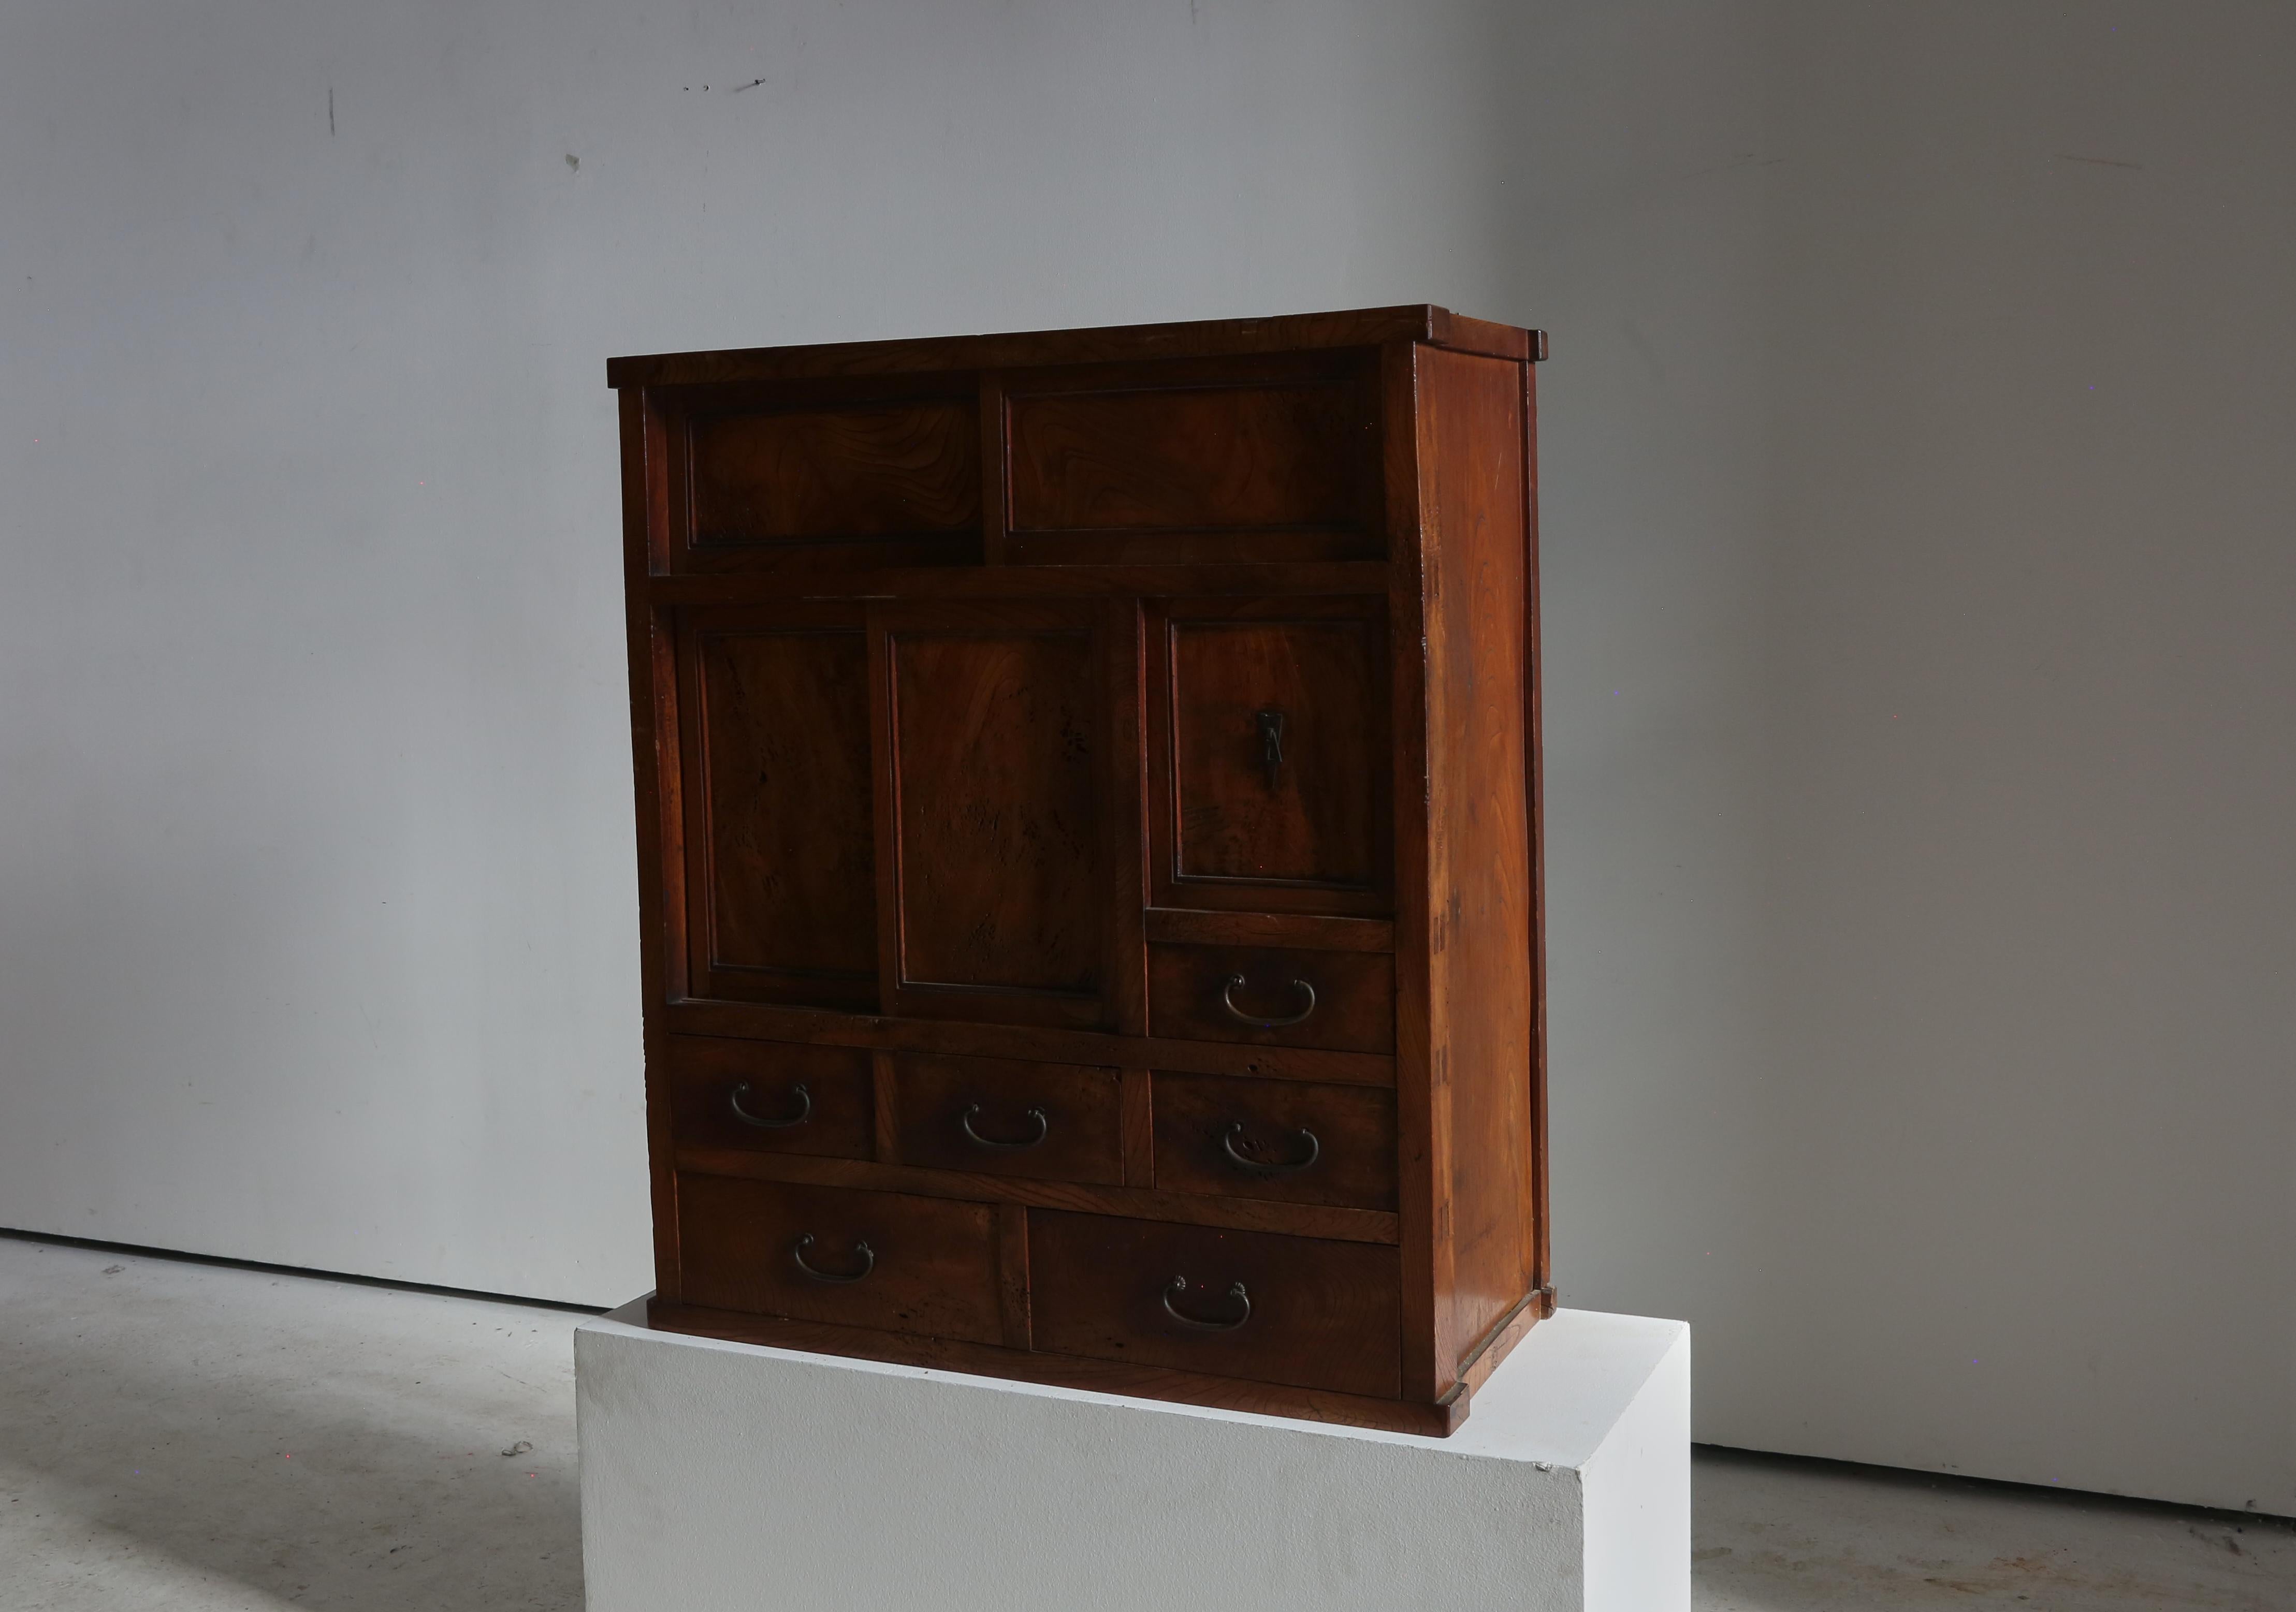 Solid Japanese Elm Burlwood Tansu / Cabinet In Excellent Condition For Sale In London, England